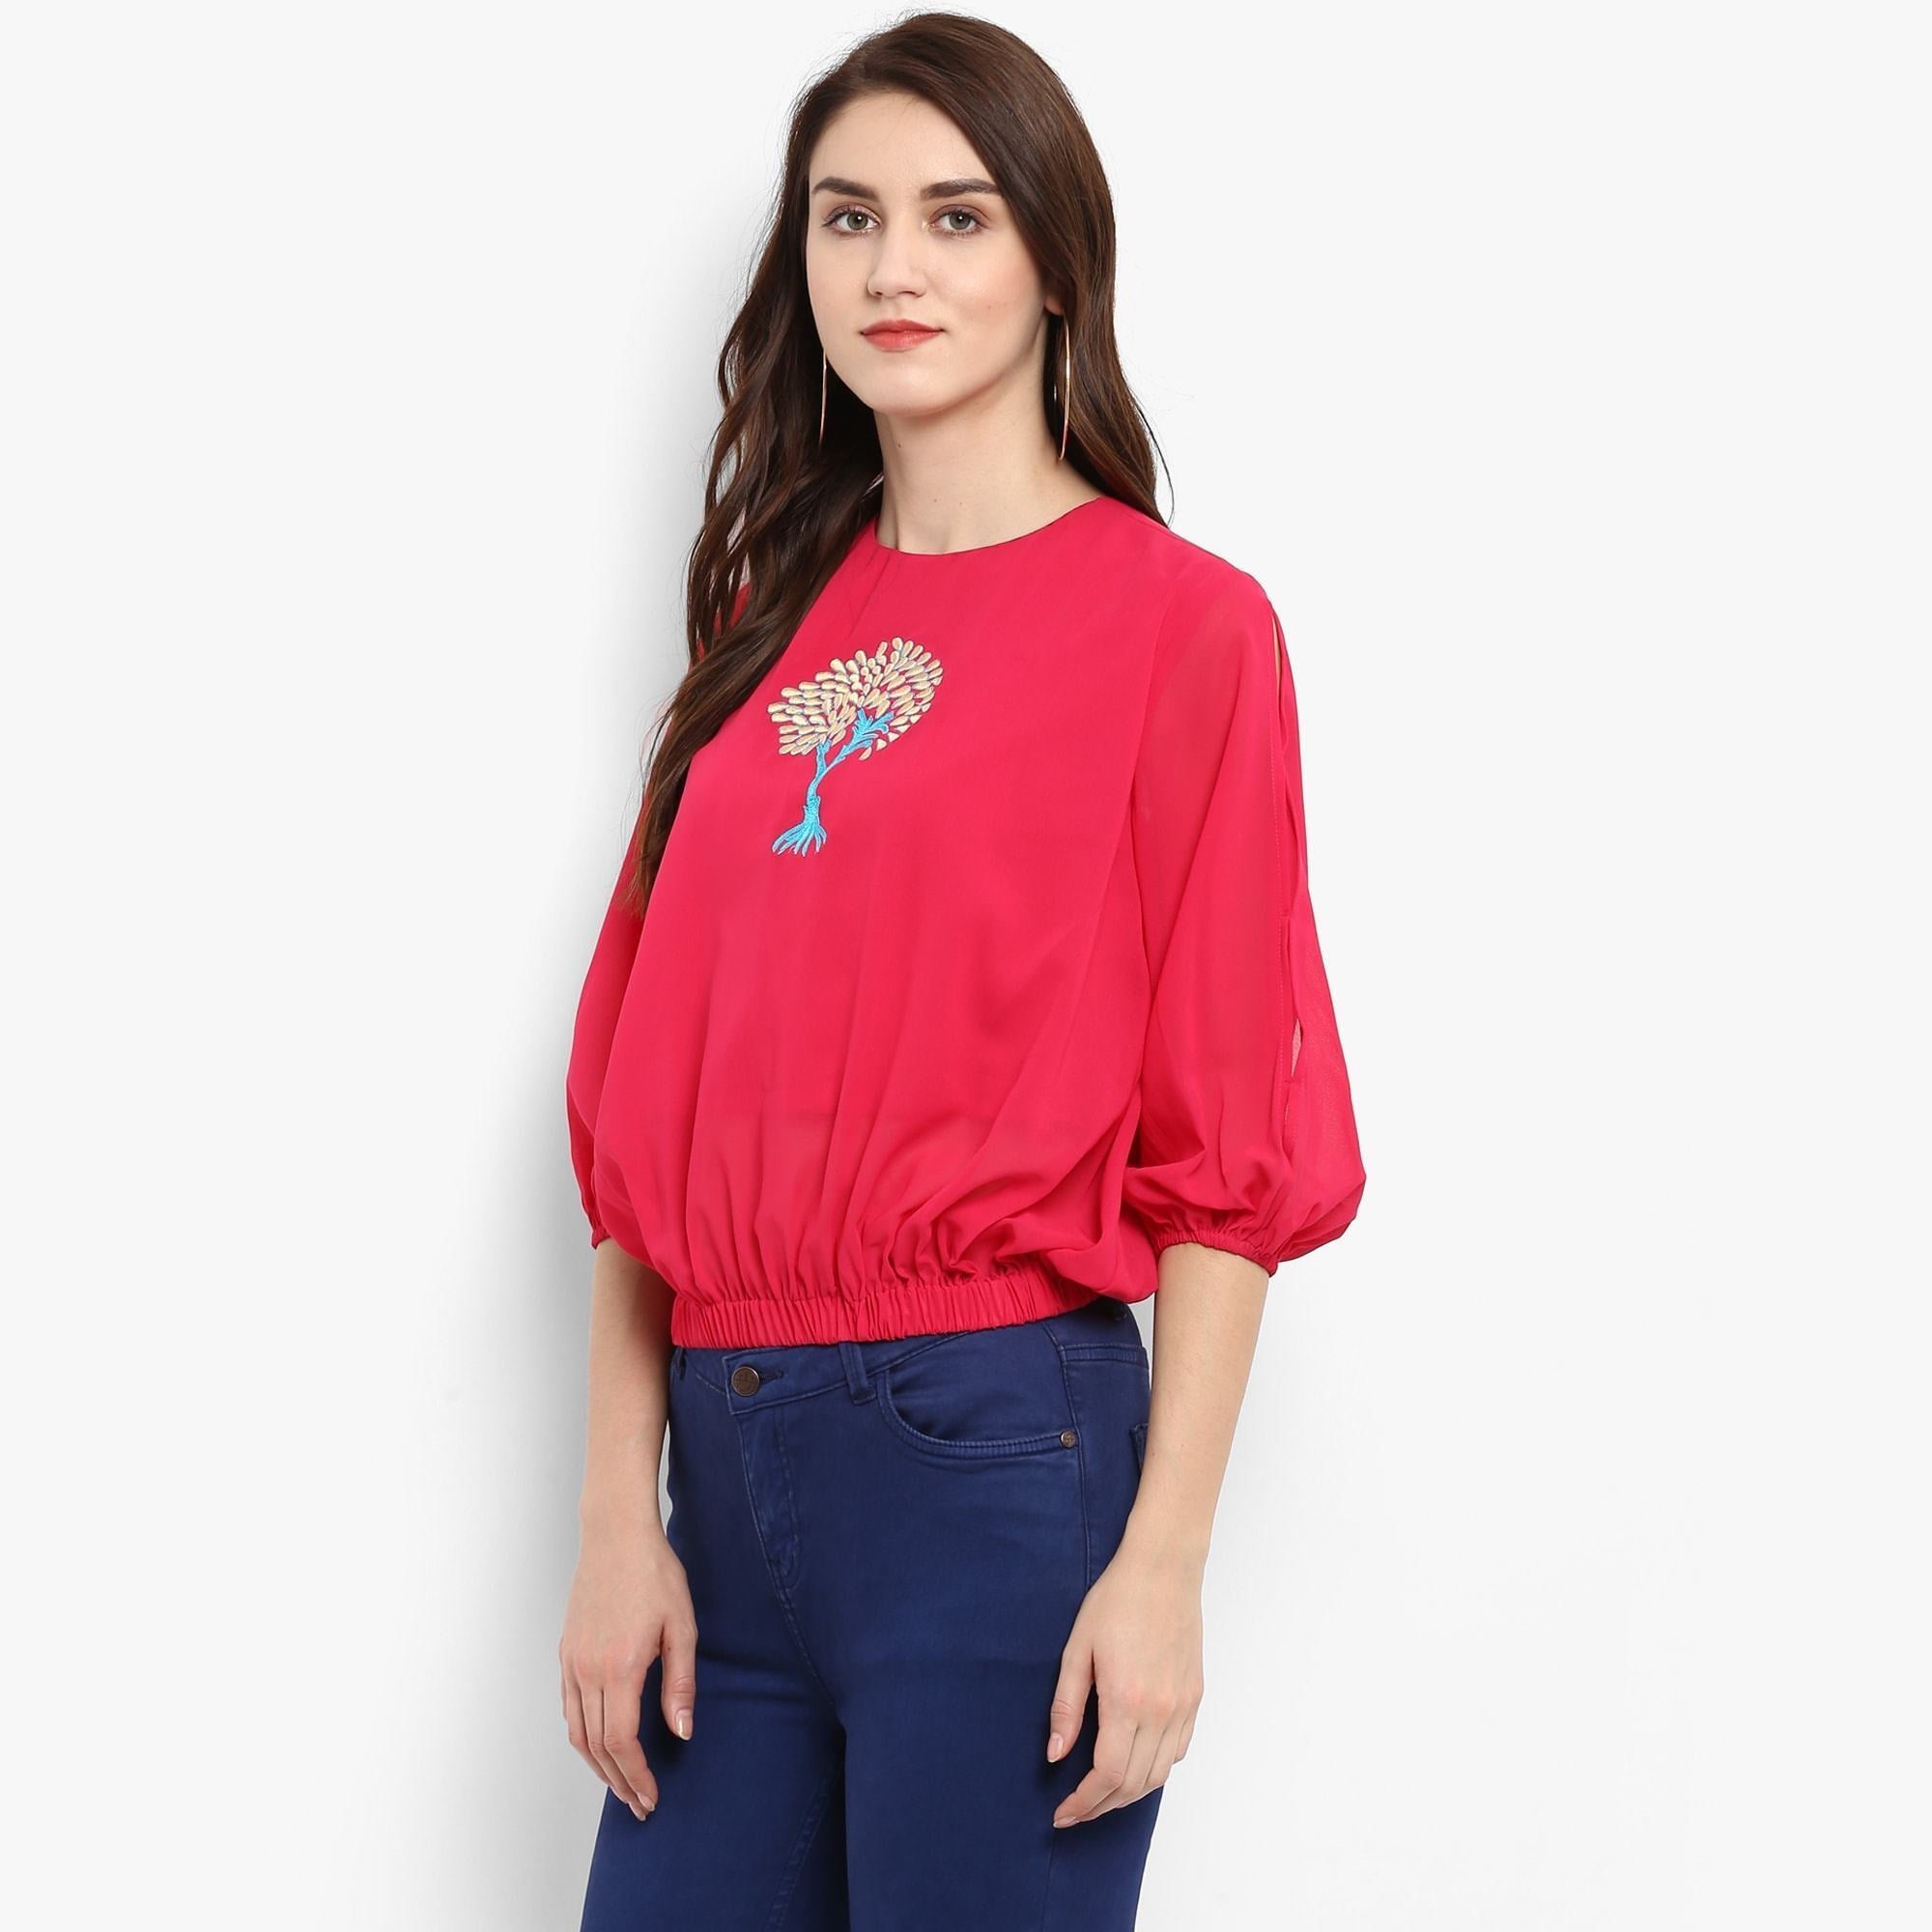 Women's Solid Embroidered Balloon Top - Pannkh